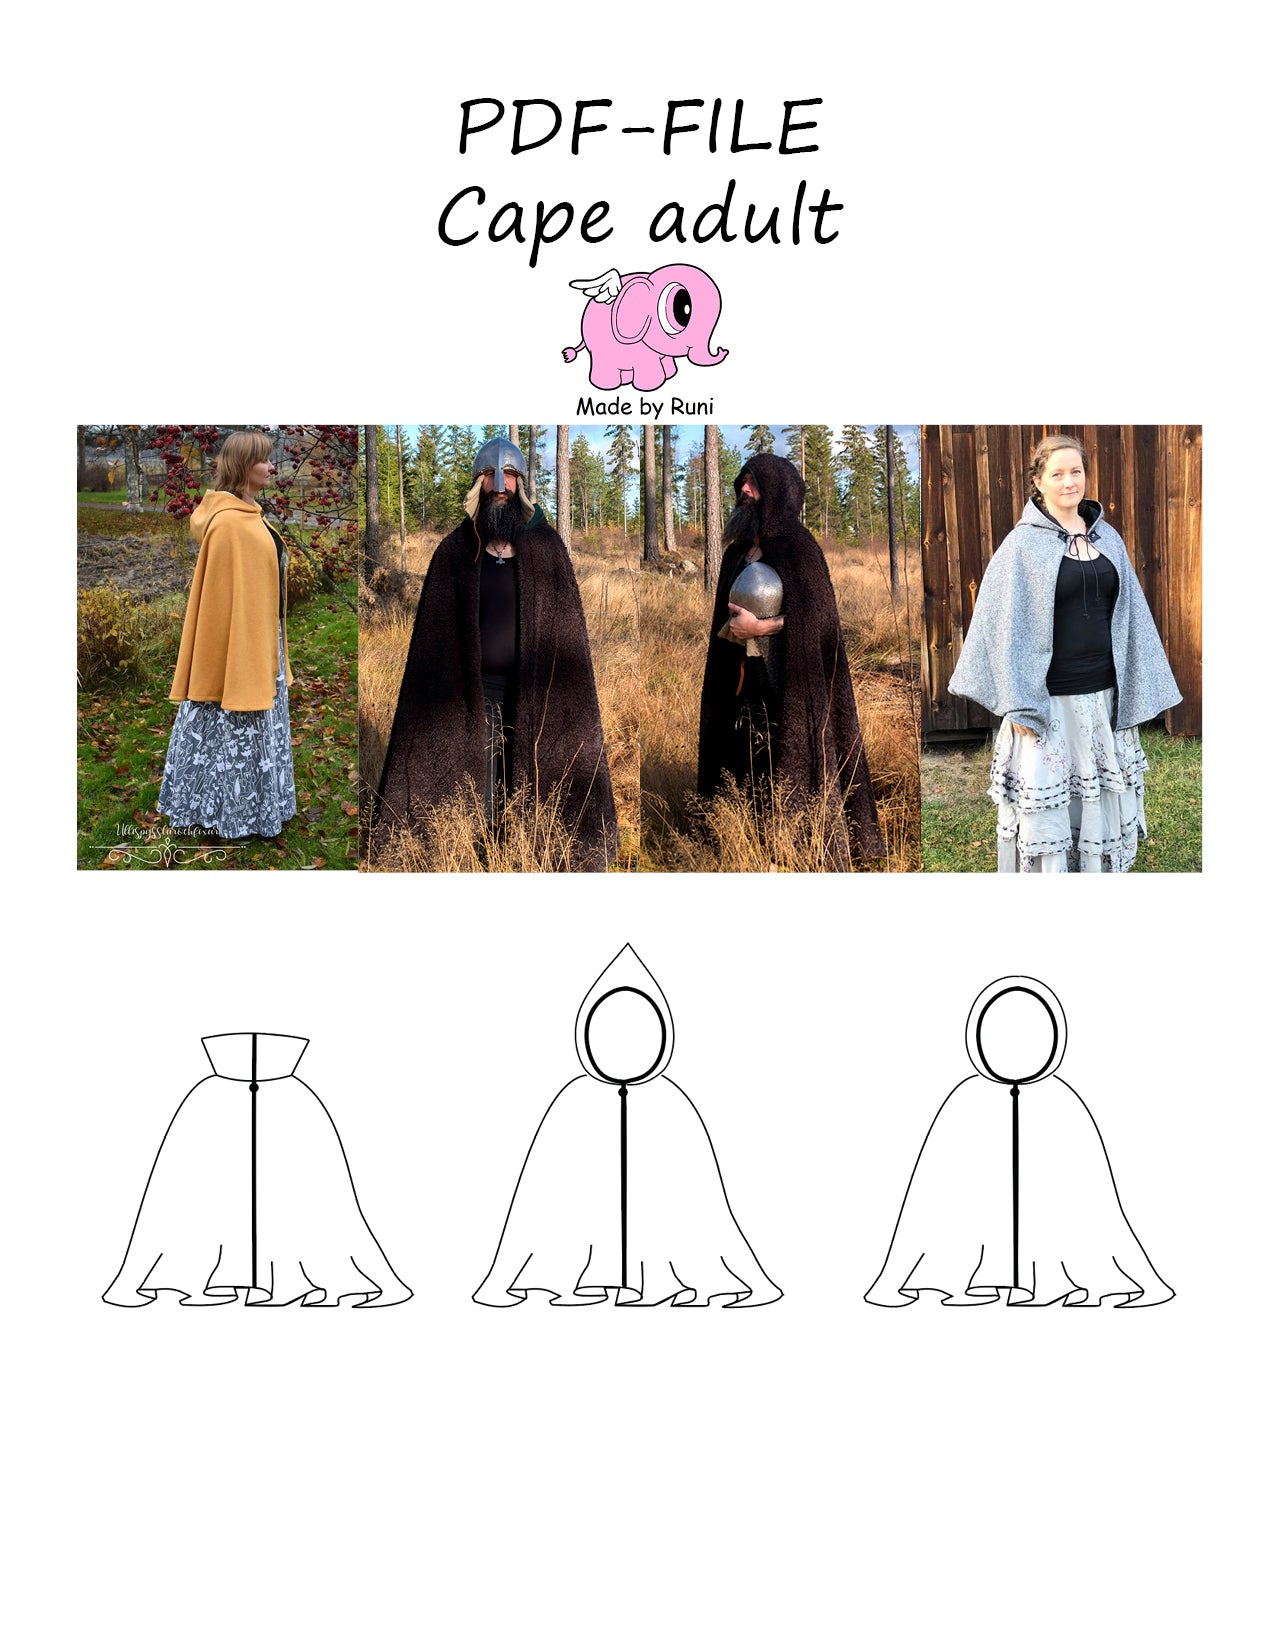 PDF-mønster/pattern: Cape adult – Made by Runi